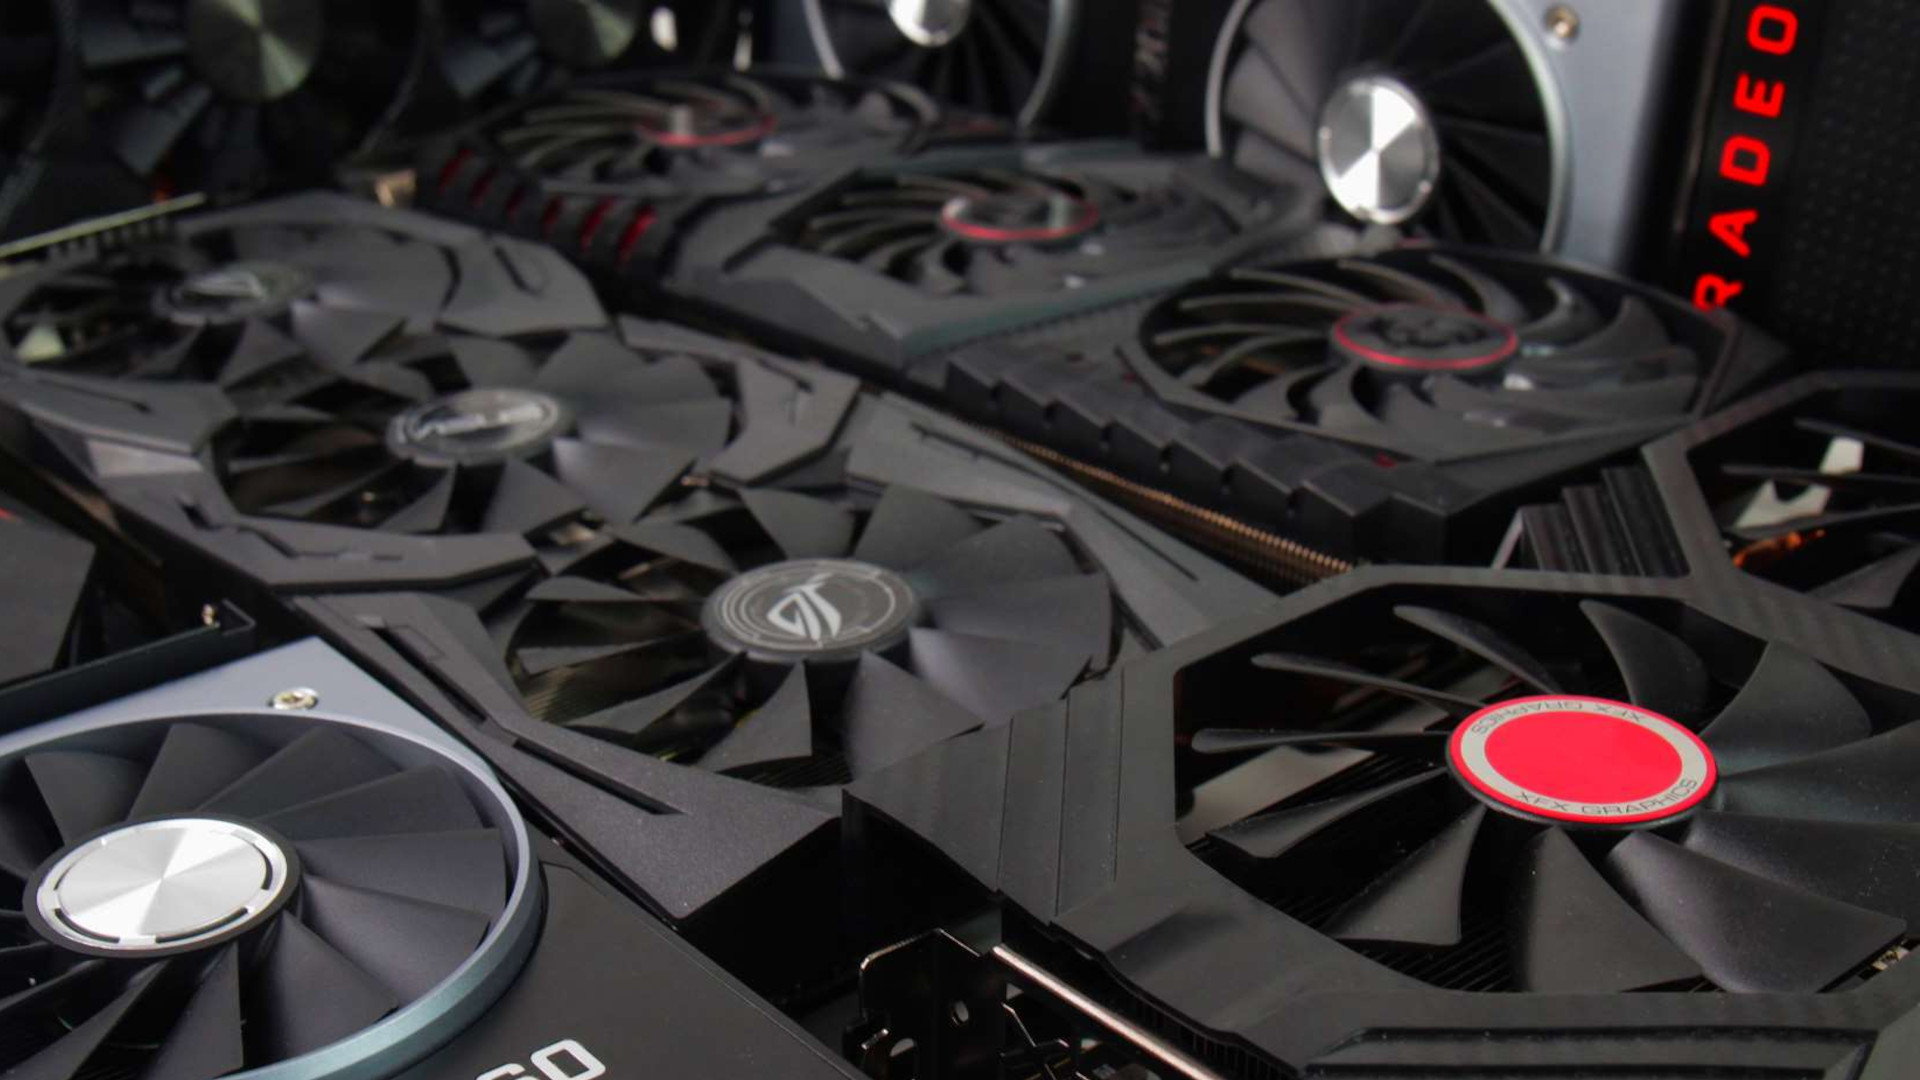 Best graphics card – what is the top graphics card for gaming in 2022?